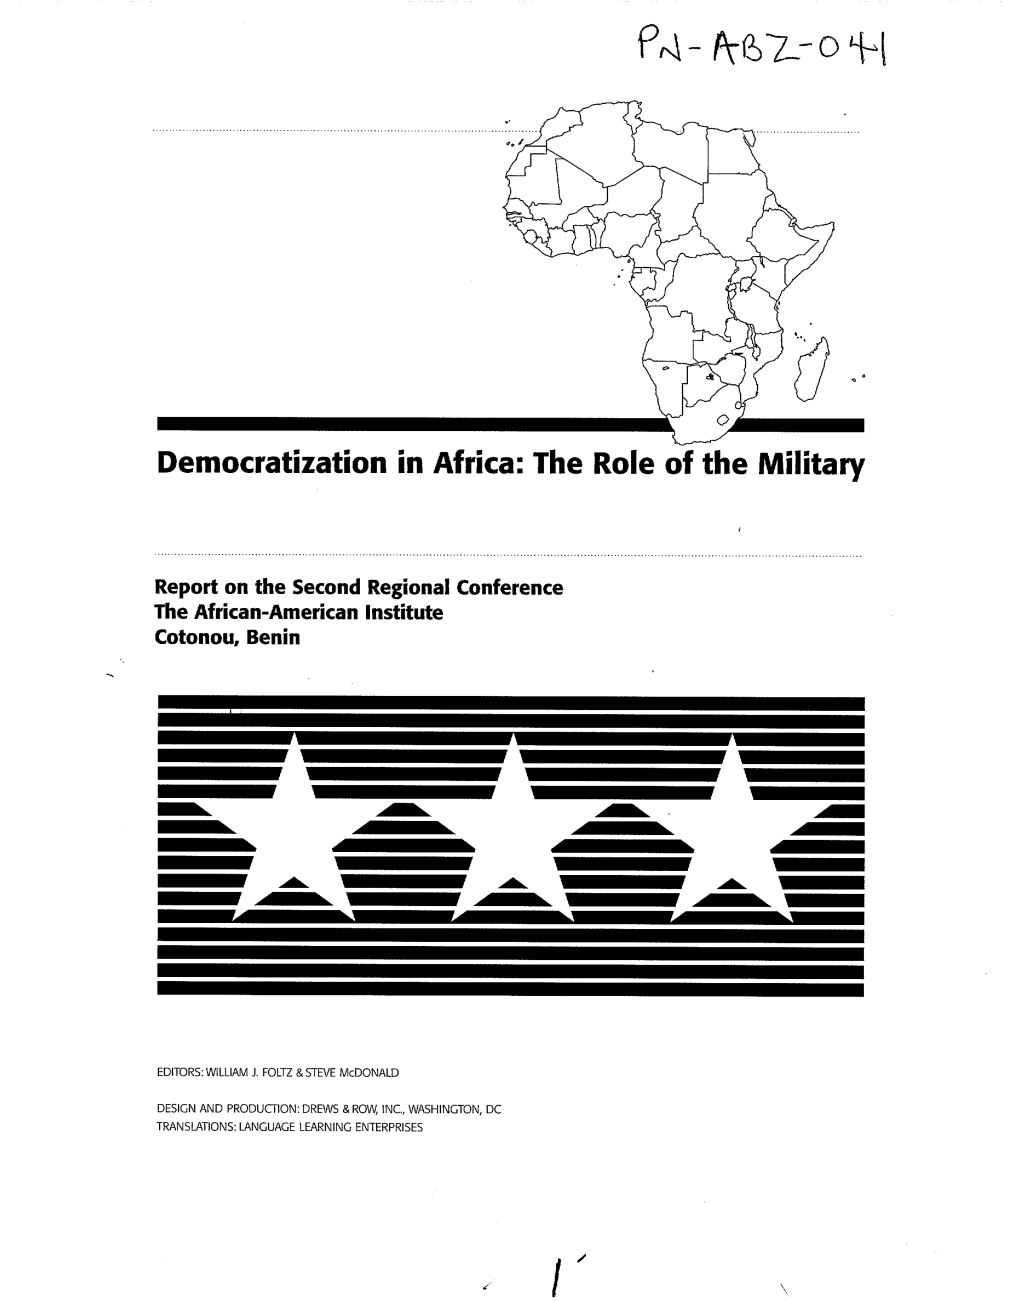 Democratization in Africa: the Role of the Military